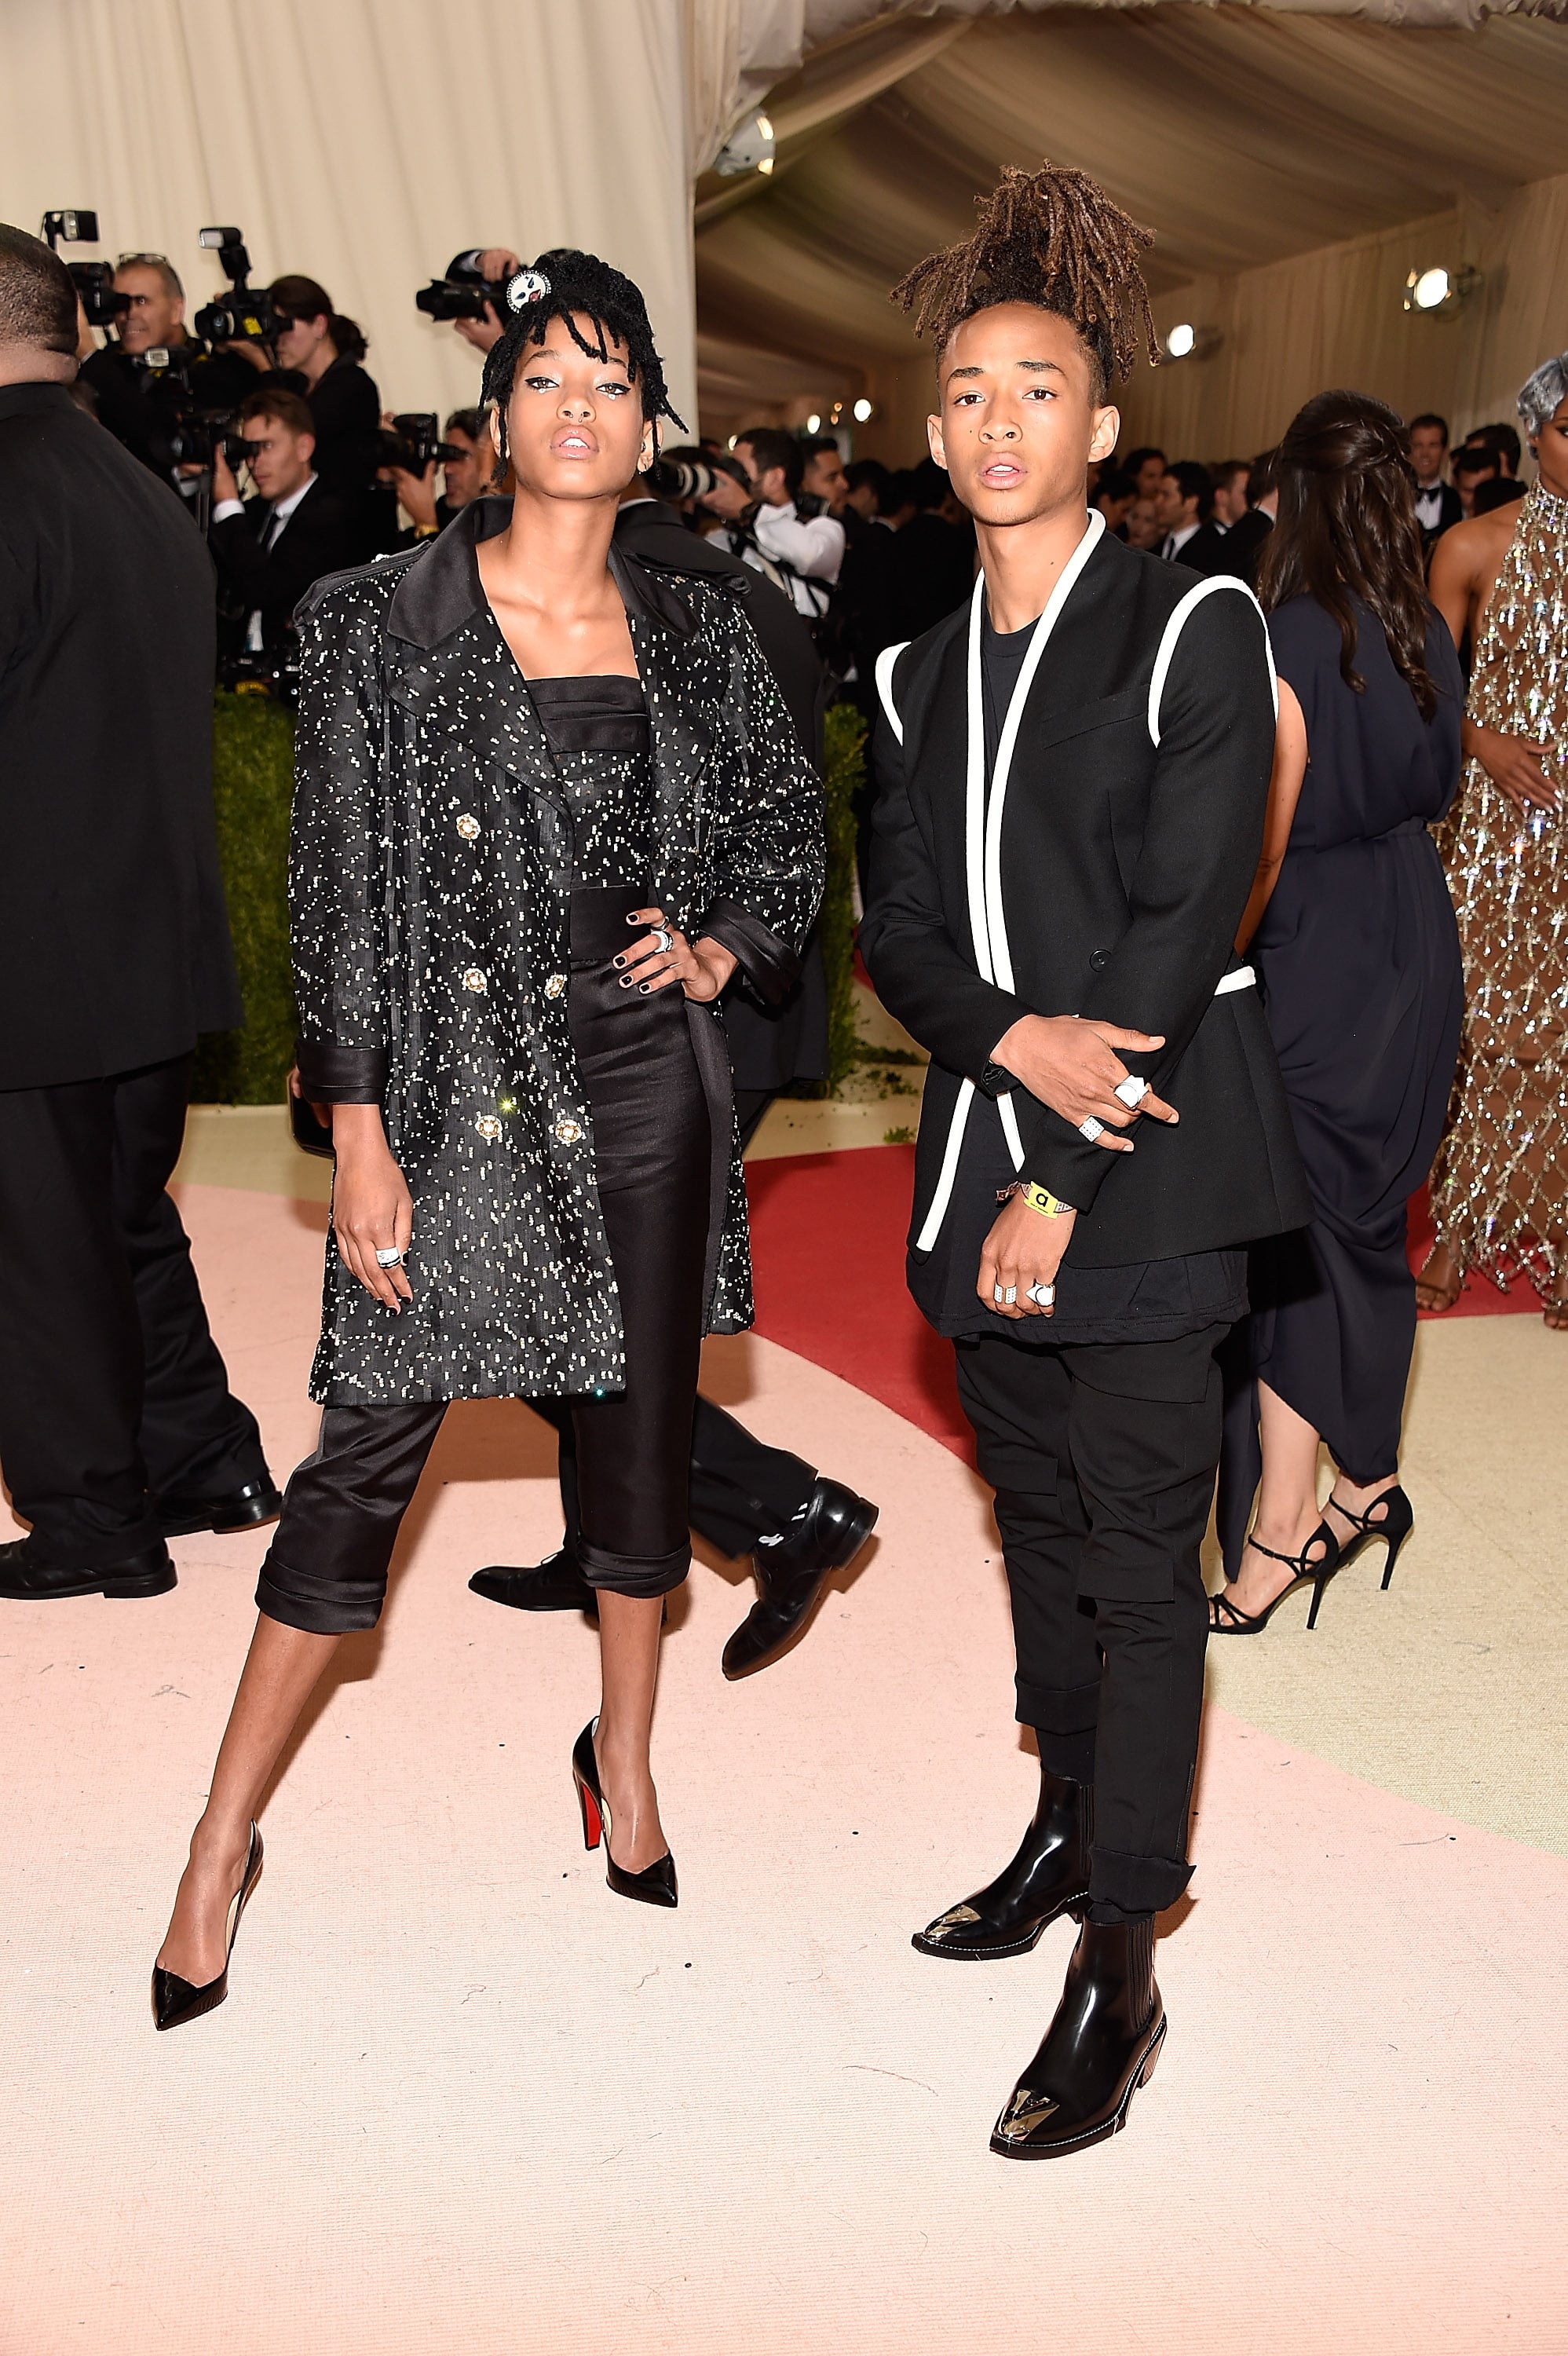 Willow Smith and Jaden Smith arriving at the 2016 Costume